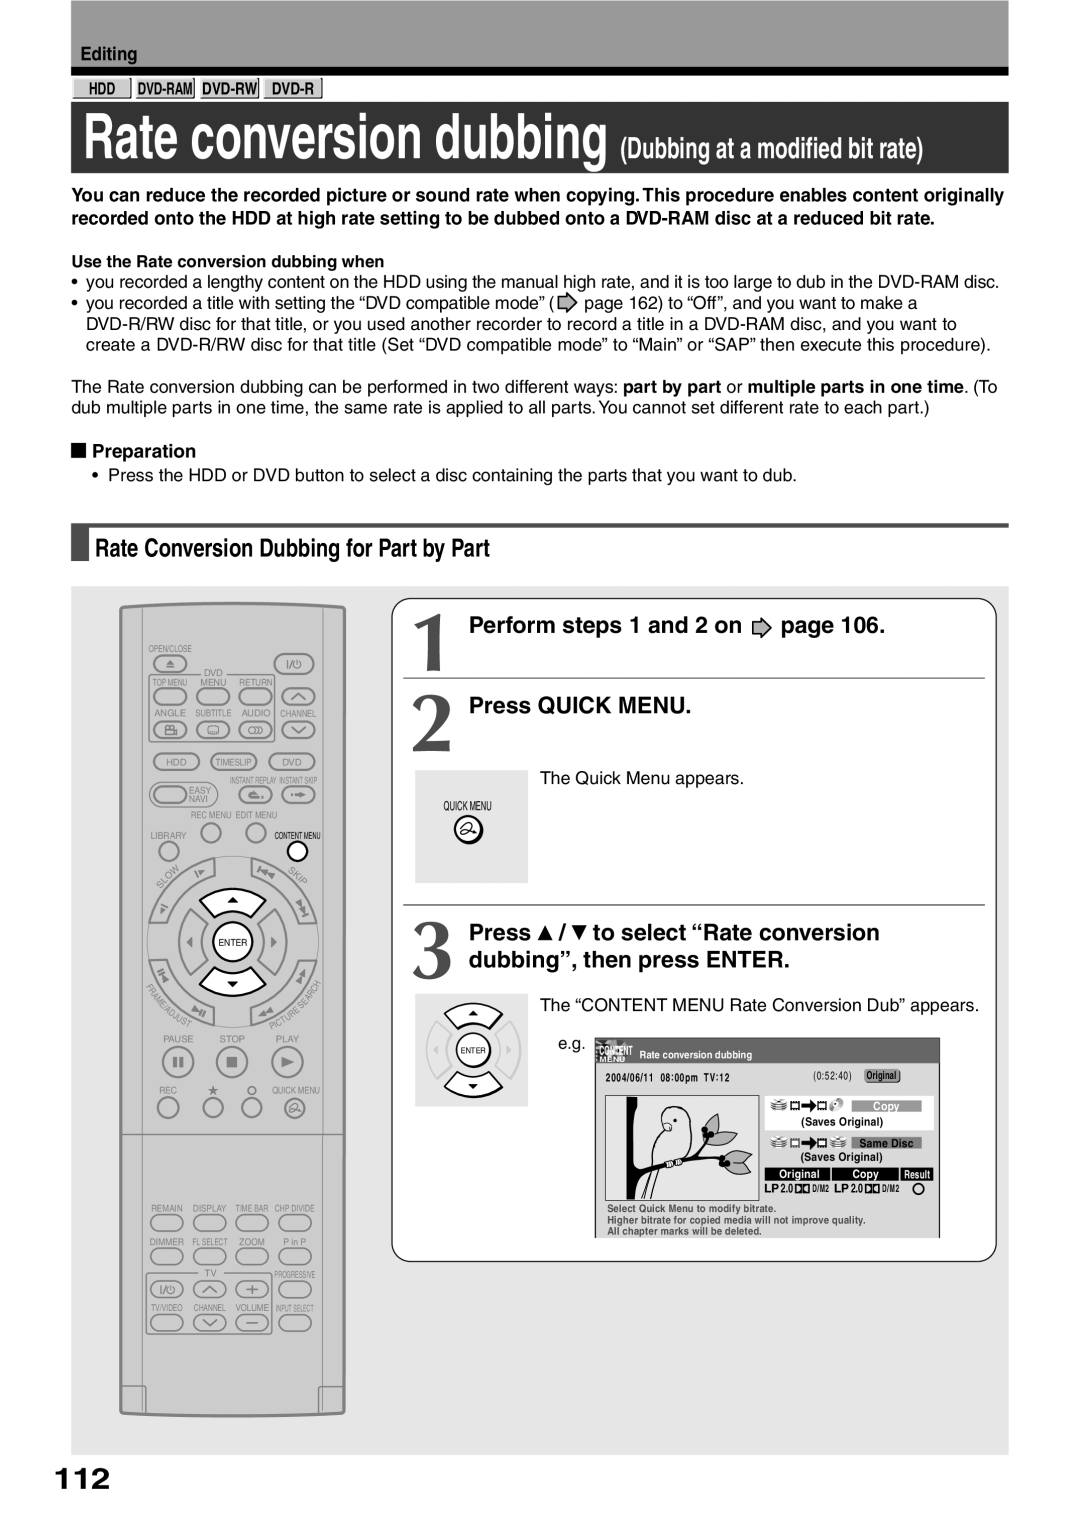 Toshiba RD-XS32SC Rate Conversion Dubbing for Part by Part, Perform steps 1 and 2 on page, Press QUICK MENU, Editing 